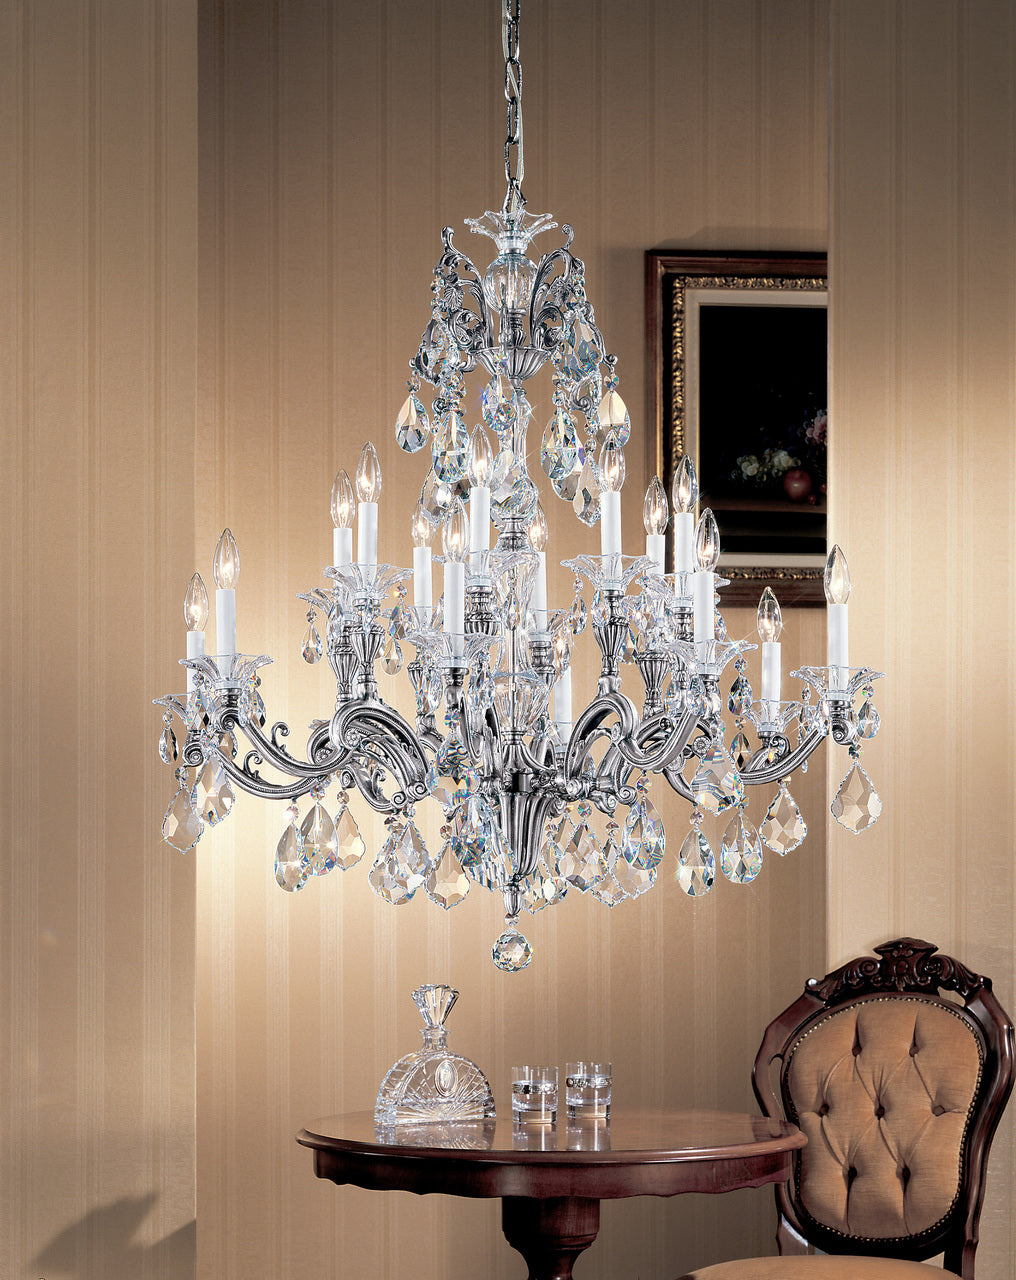 Classic Lighting 57116 SP SC Via Firenze Crystal Chandelier in Silver (Imported from Spain)